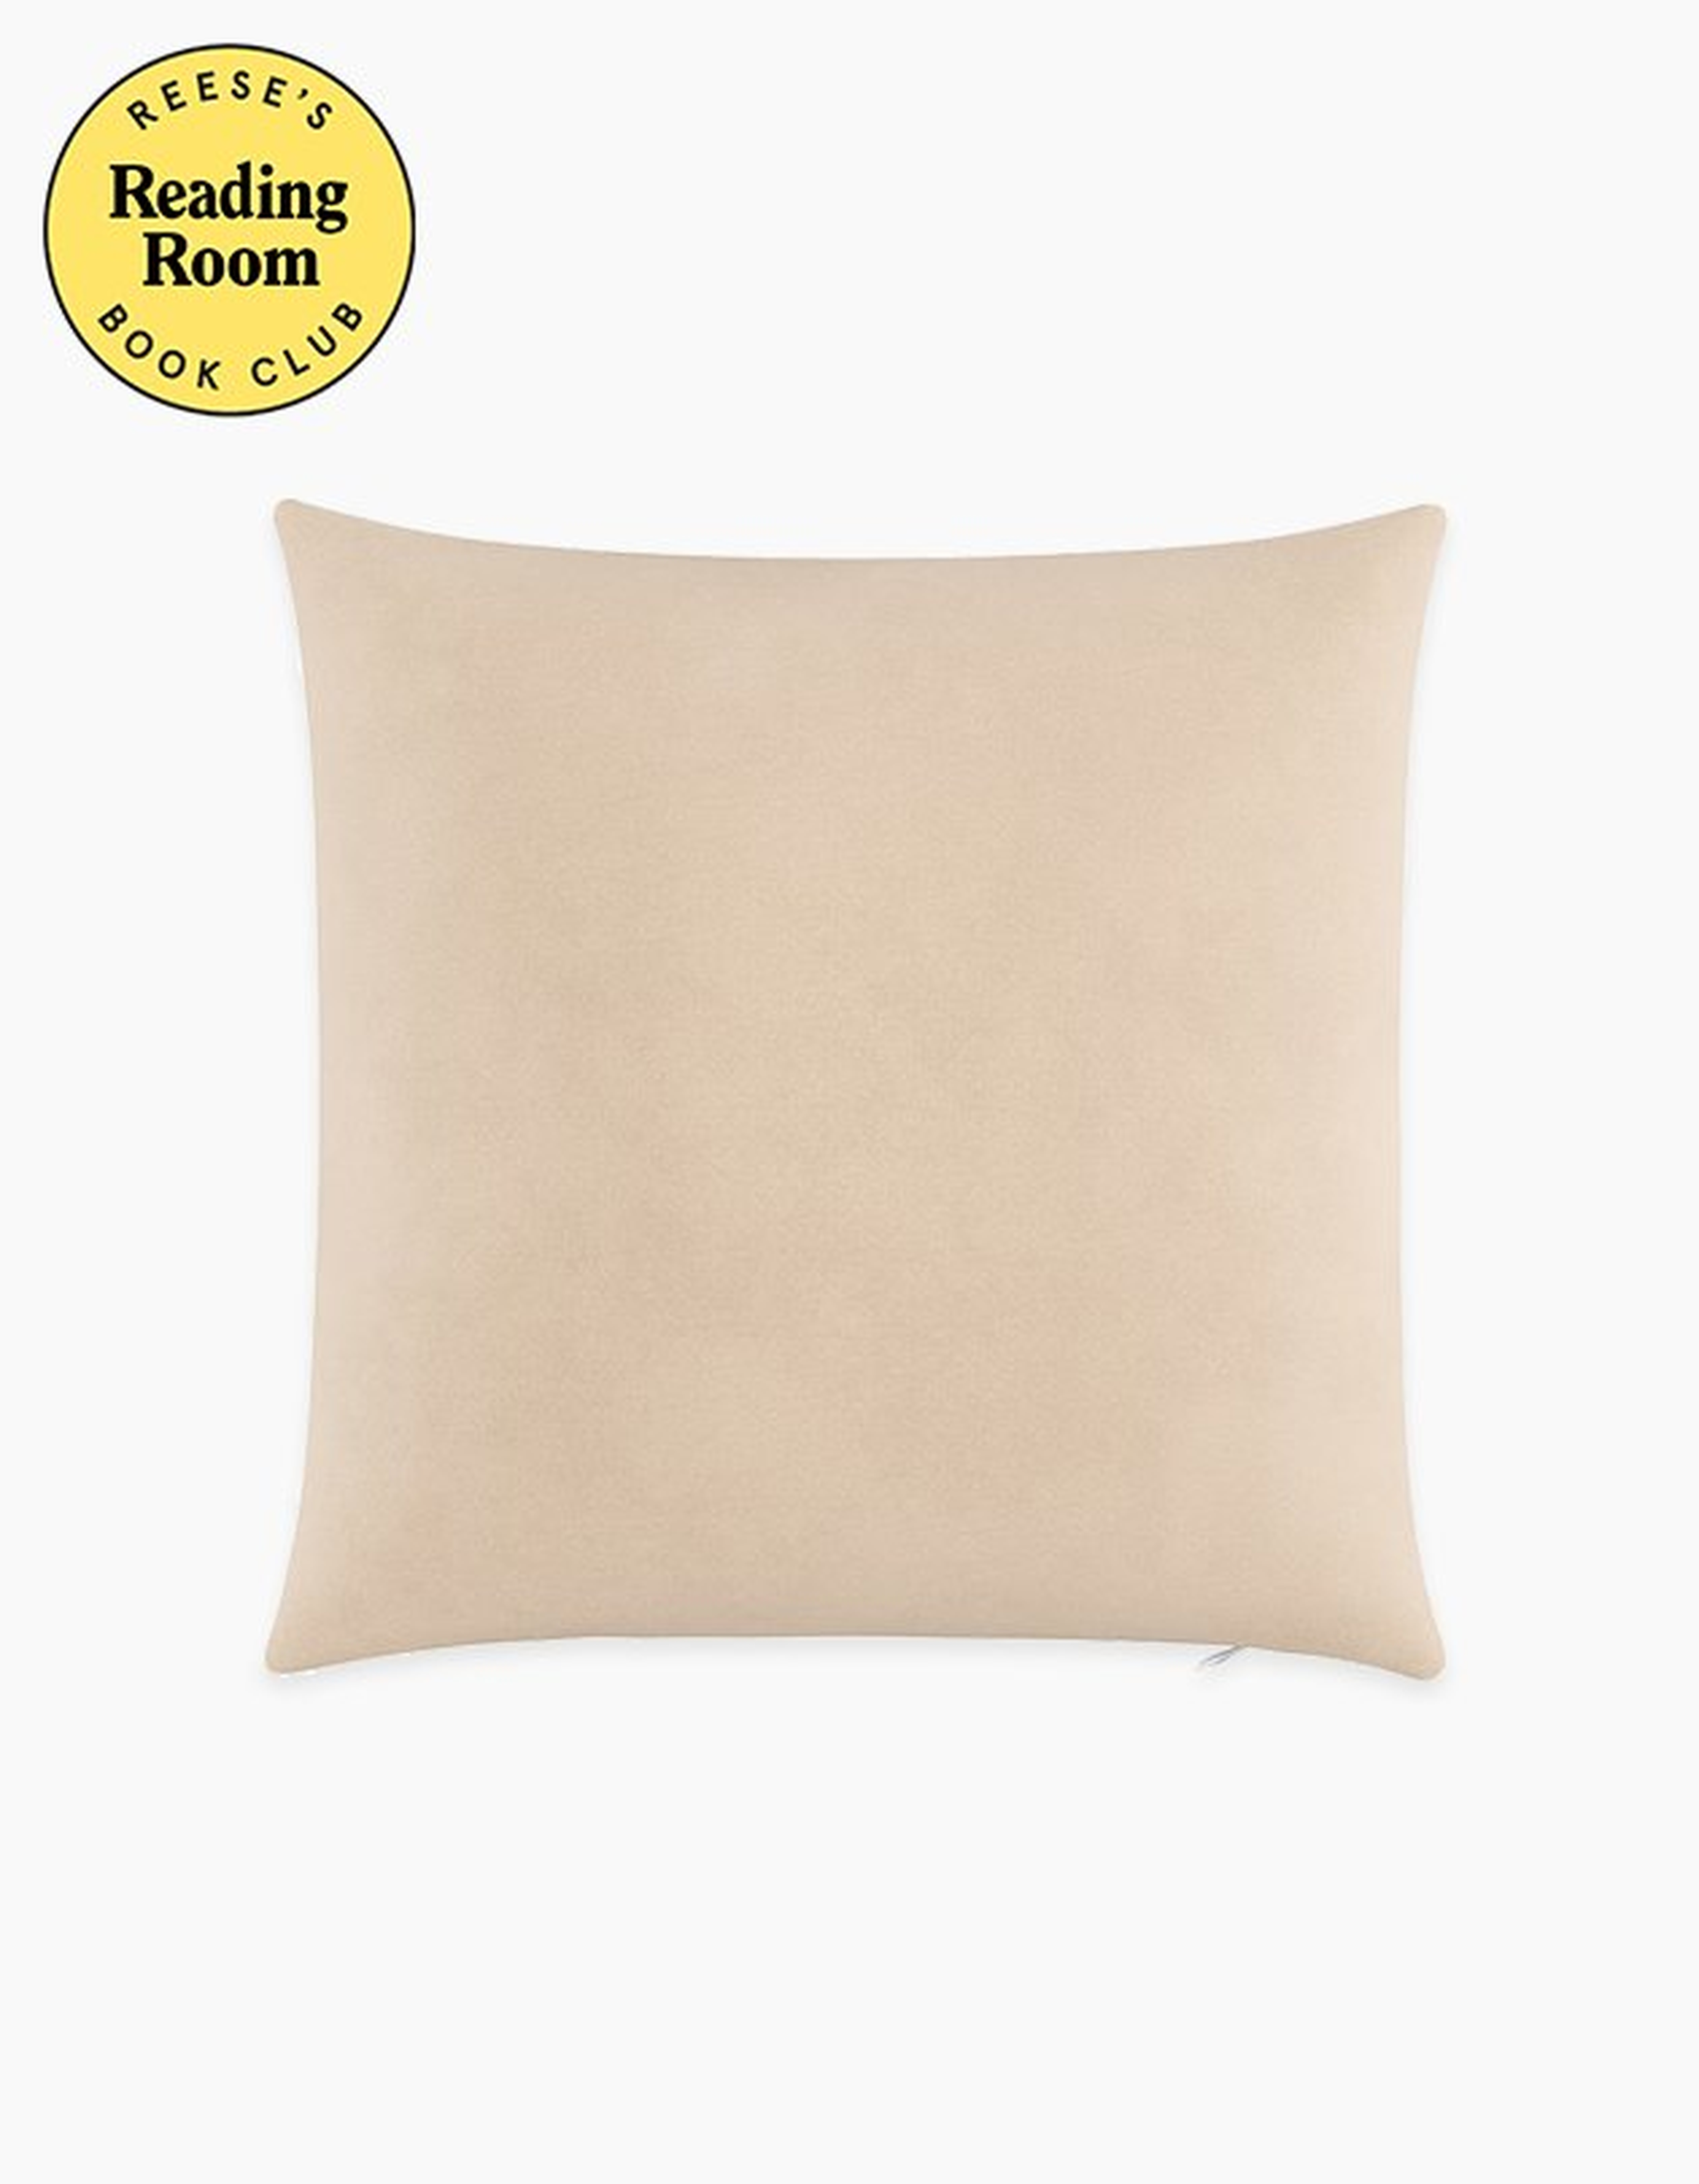 Pearl Velvet Throw Pillow - 20" x 20" - Reese's Book Club x Havenly